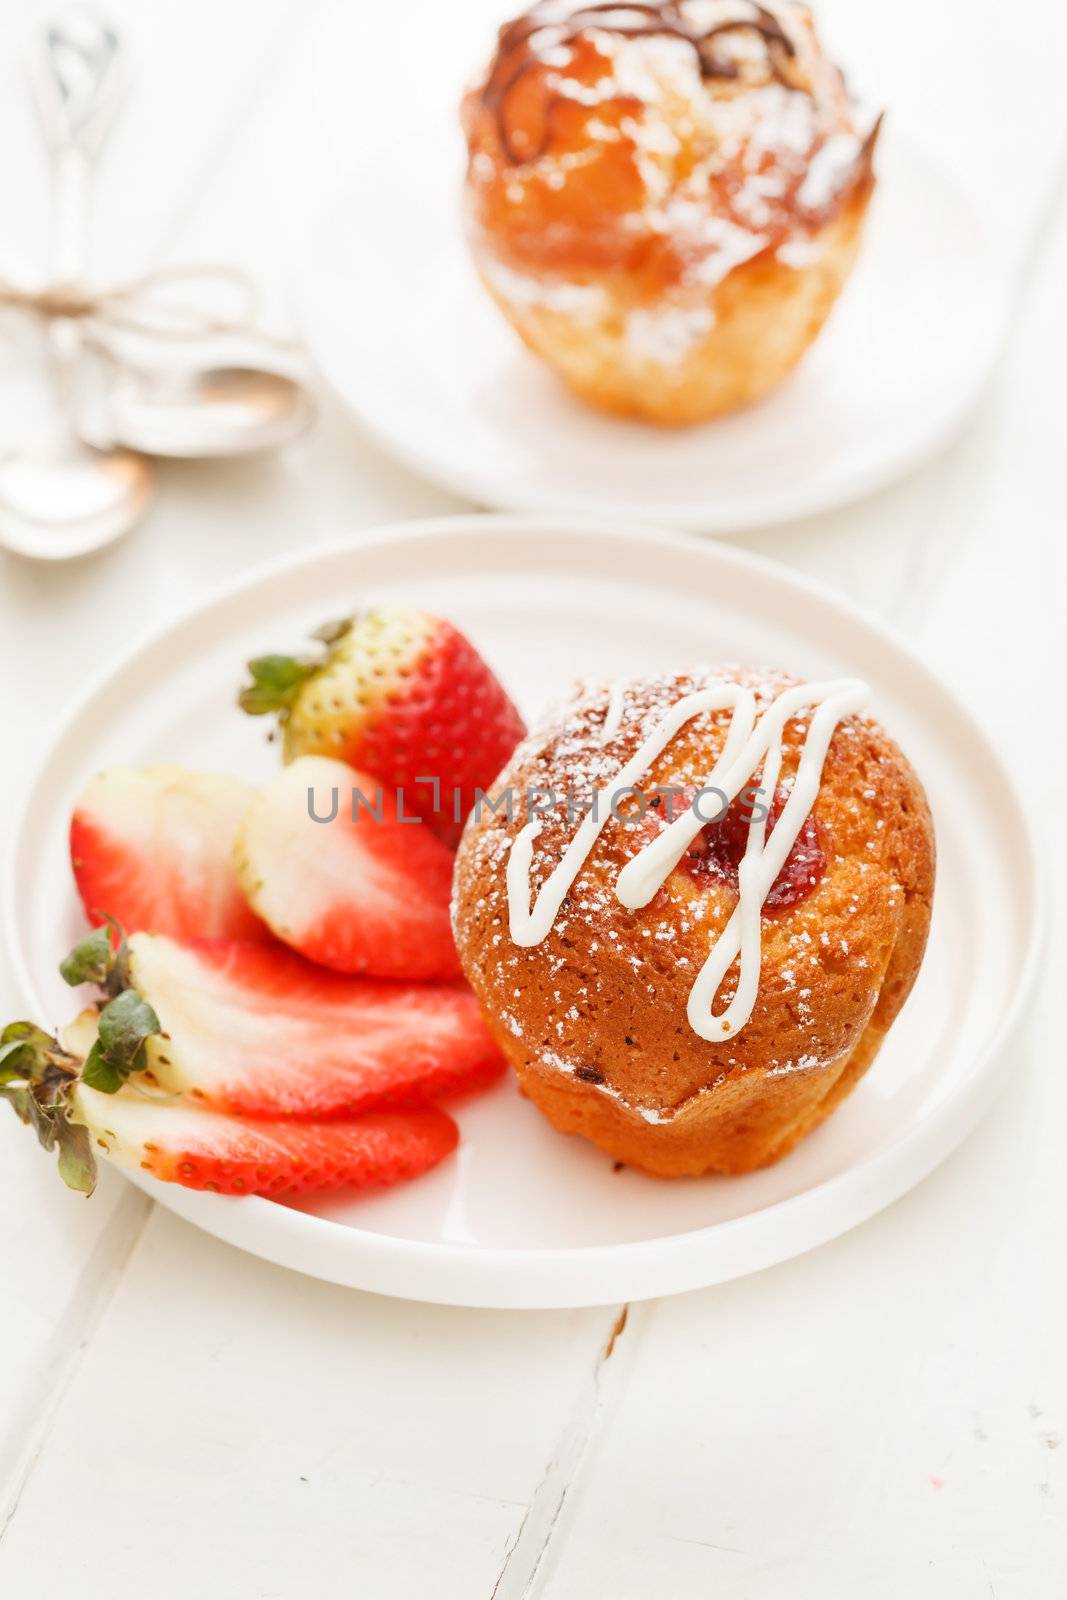 muffin with strawberry